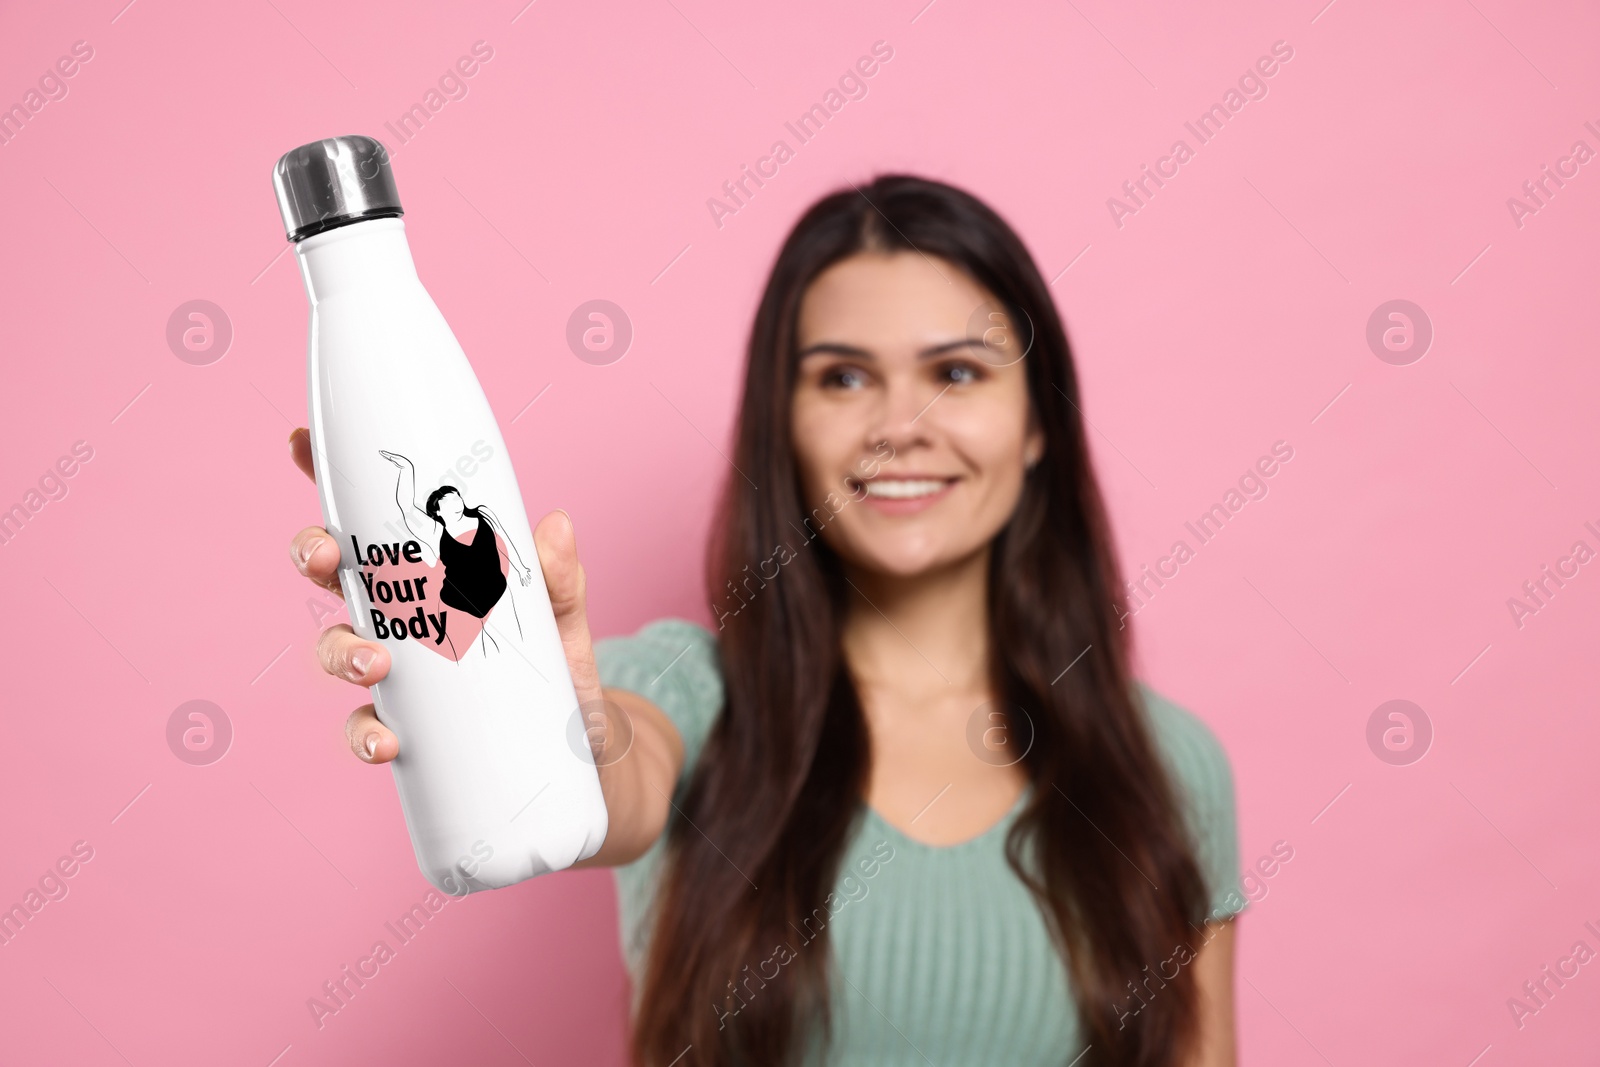 Image of Smiling woman holding thermo bottle with drawn figure of plus-size model, heart and phrase Love Your Body against pink background, selective focus